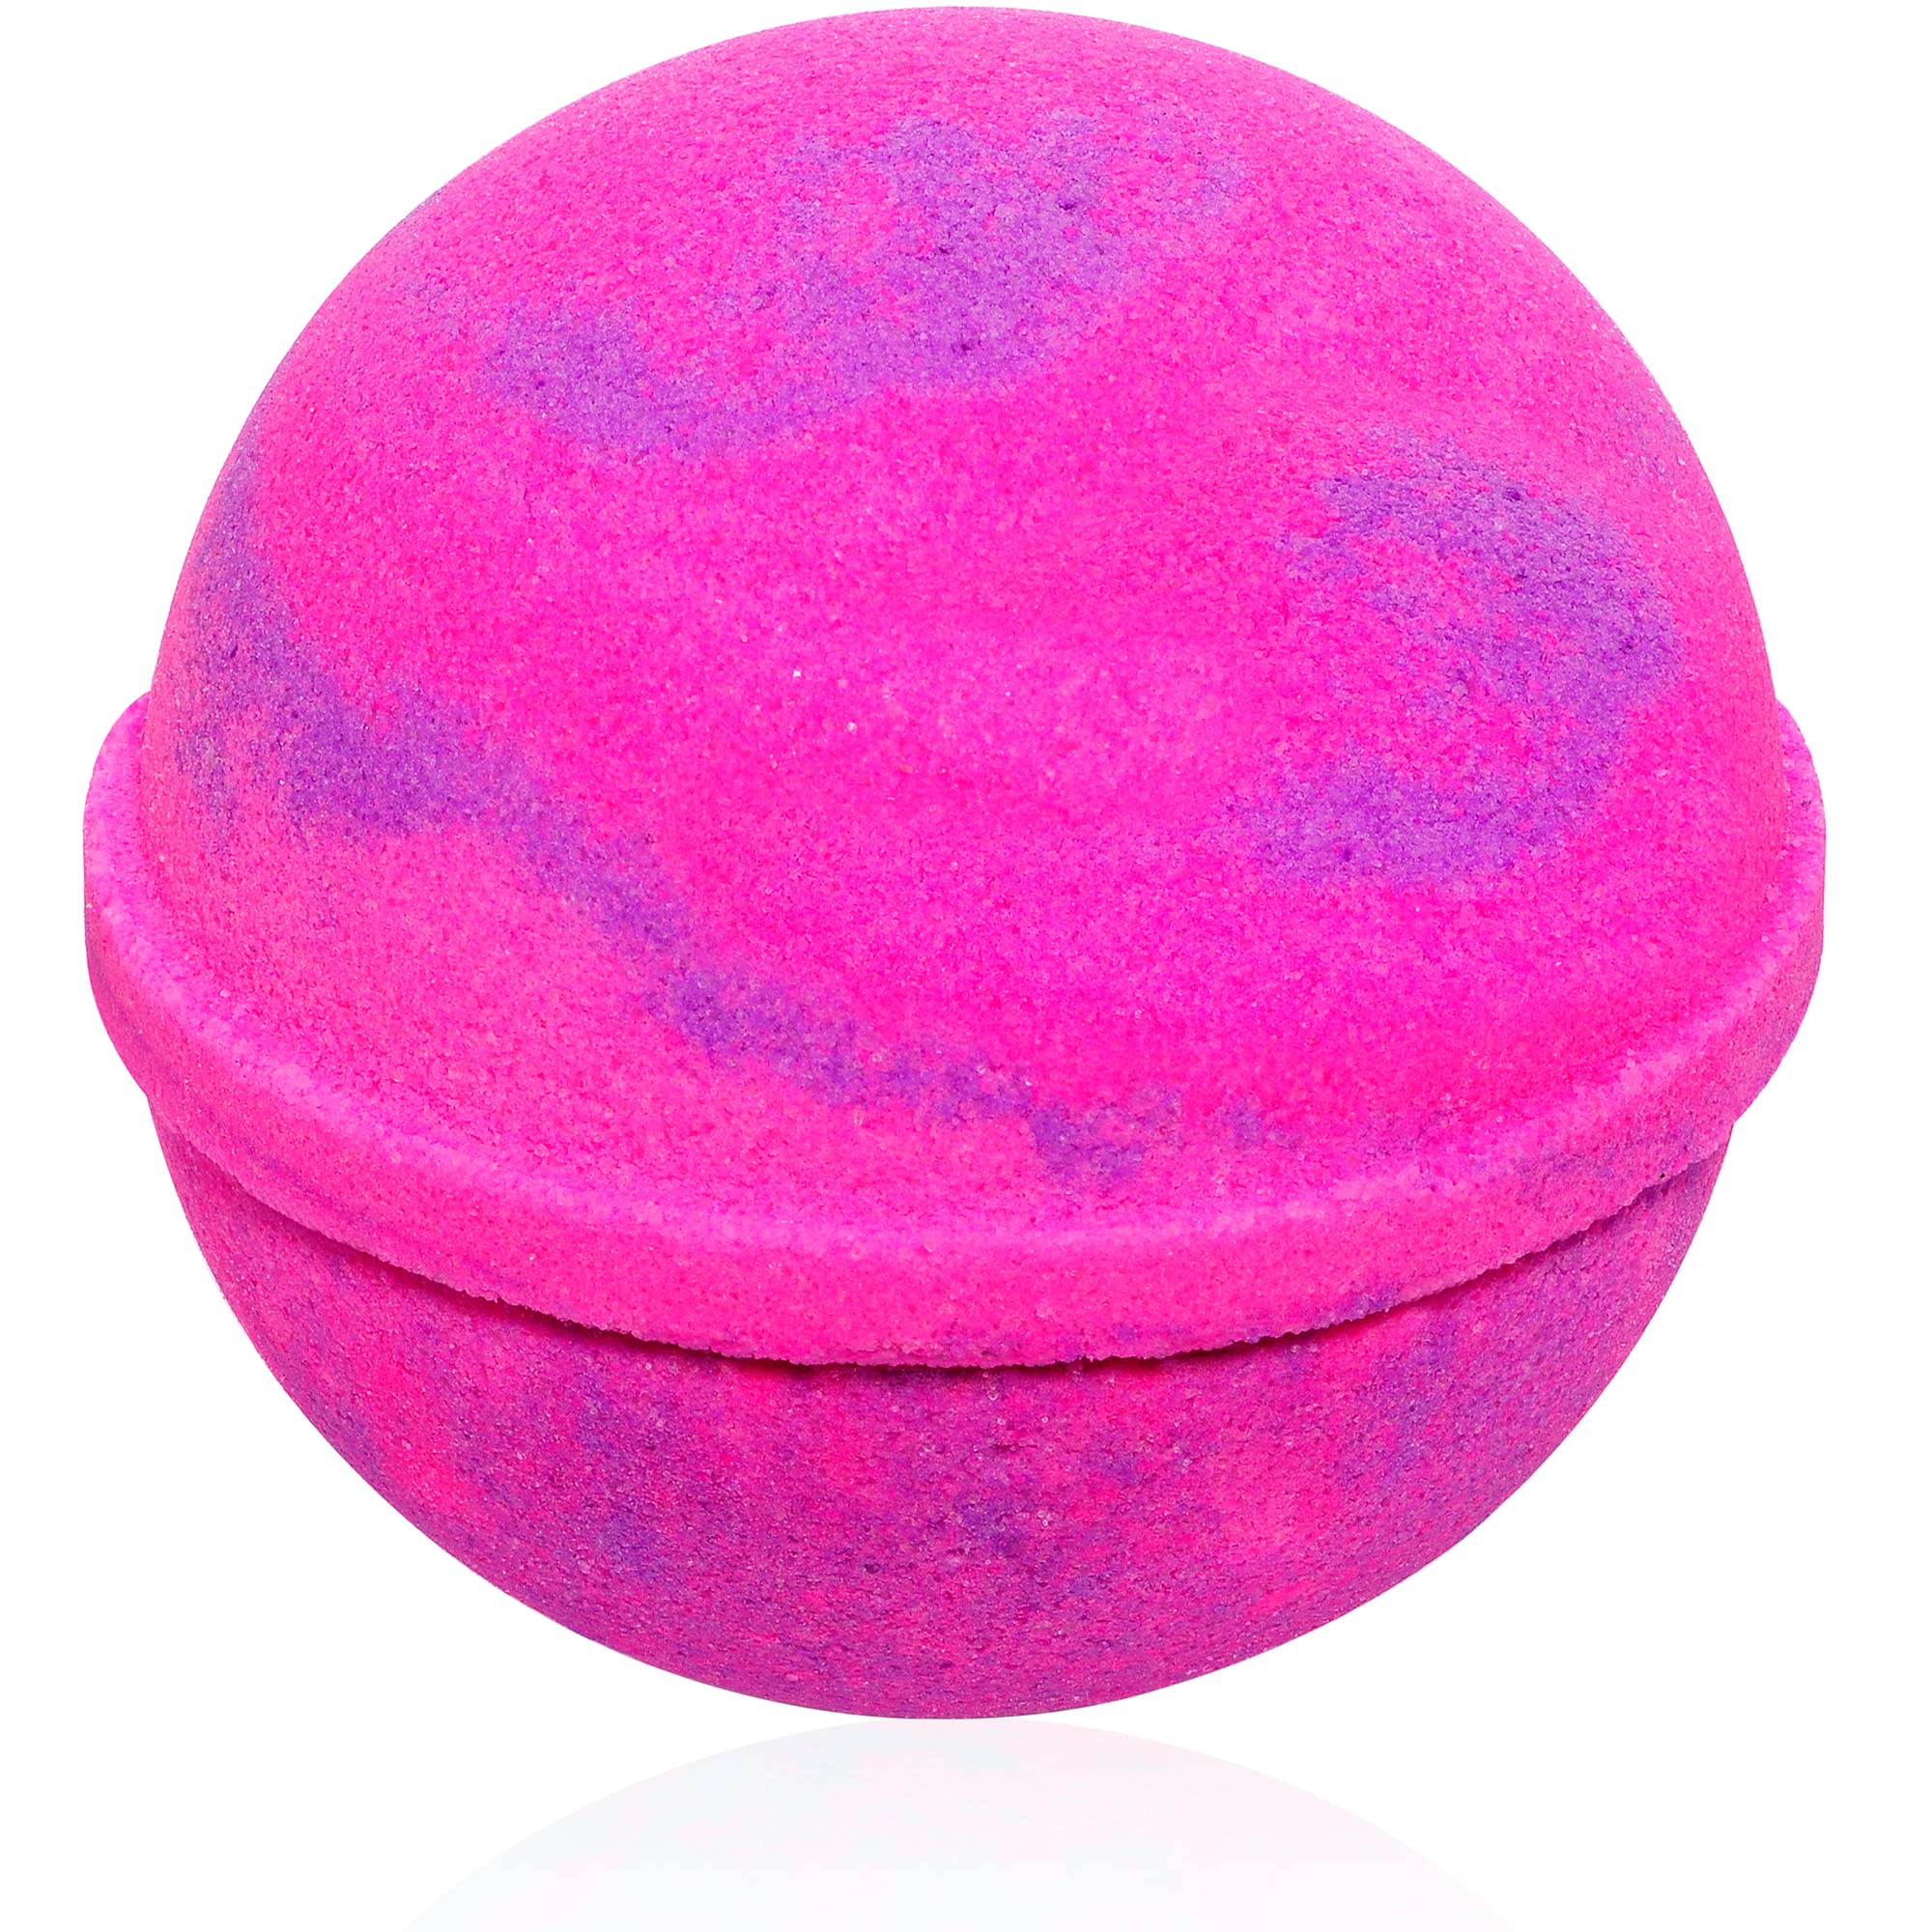 Bath Bomb with Size 8 Ring Inside Love Potion Extra Large 10 oz. Made in USA